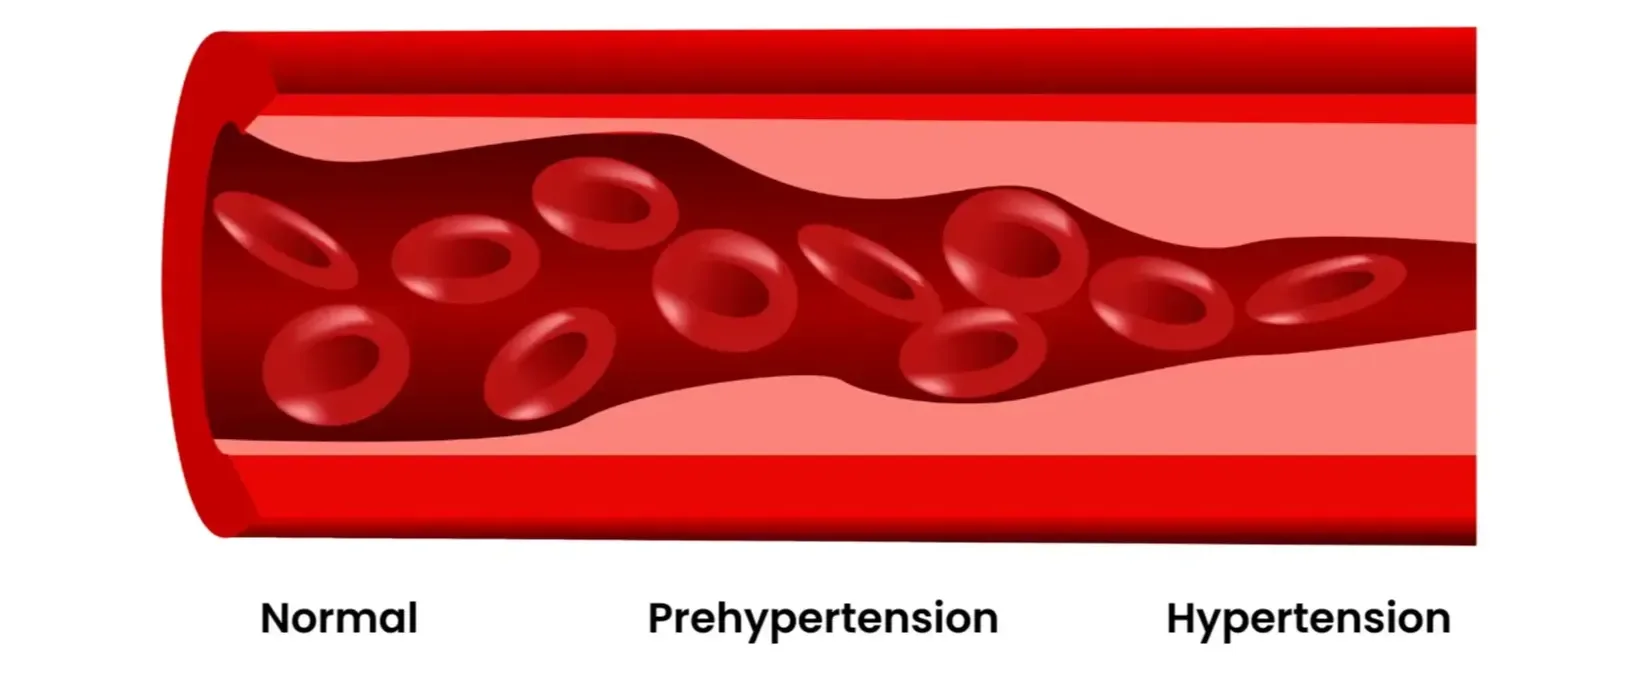 Animated graphic showing the progression of hypertension (high blood pressure). Norma > Prehypertension > Hypertension.